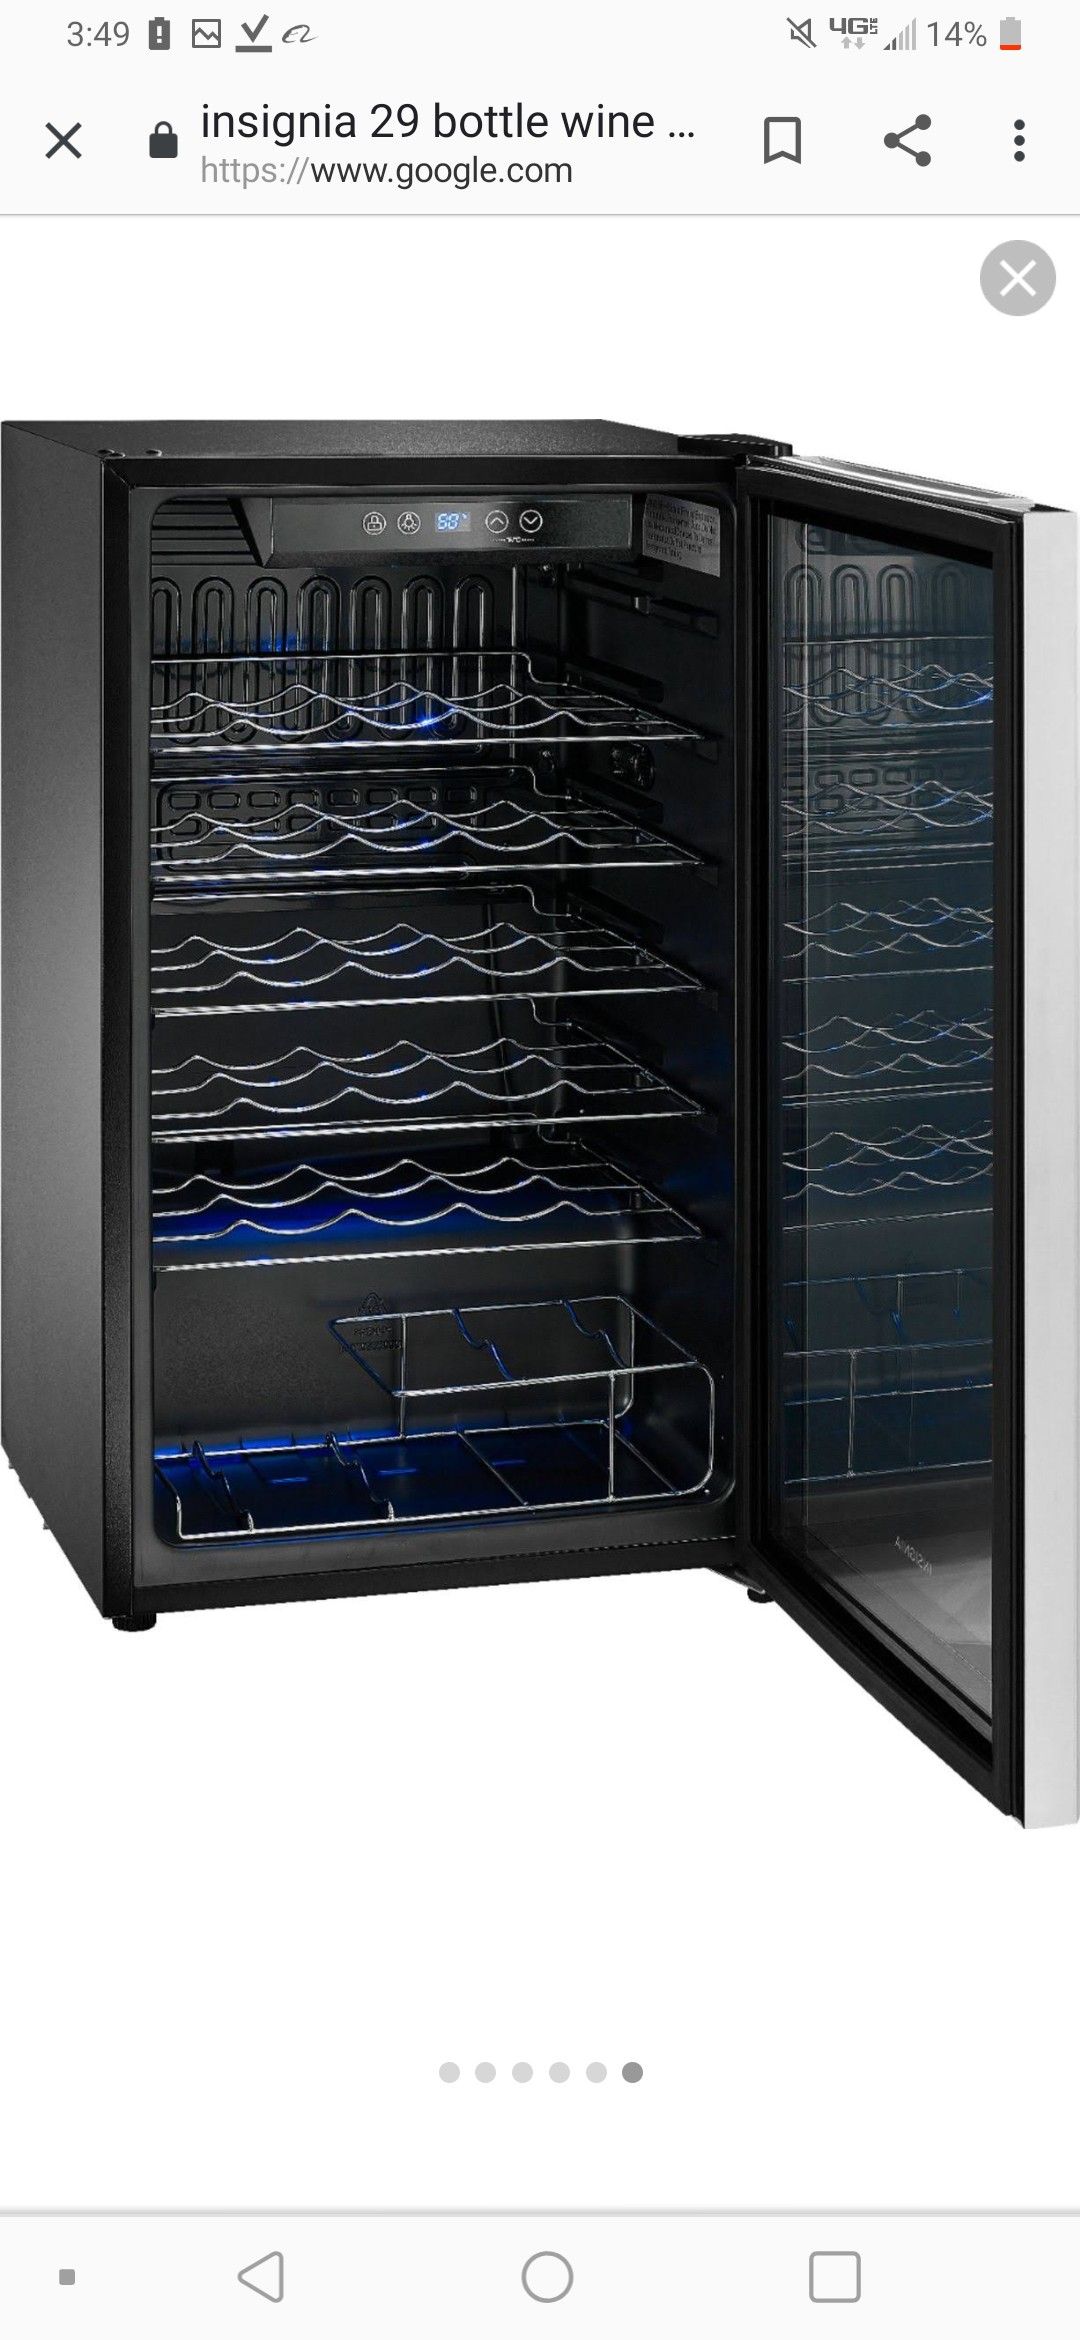 Insignia 29 bottle wine cooler brand new in box